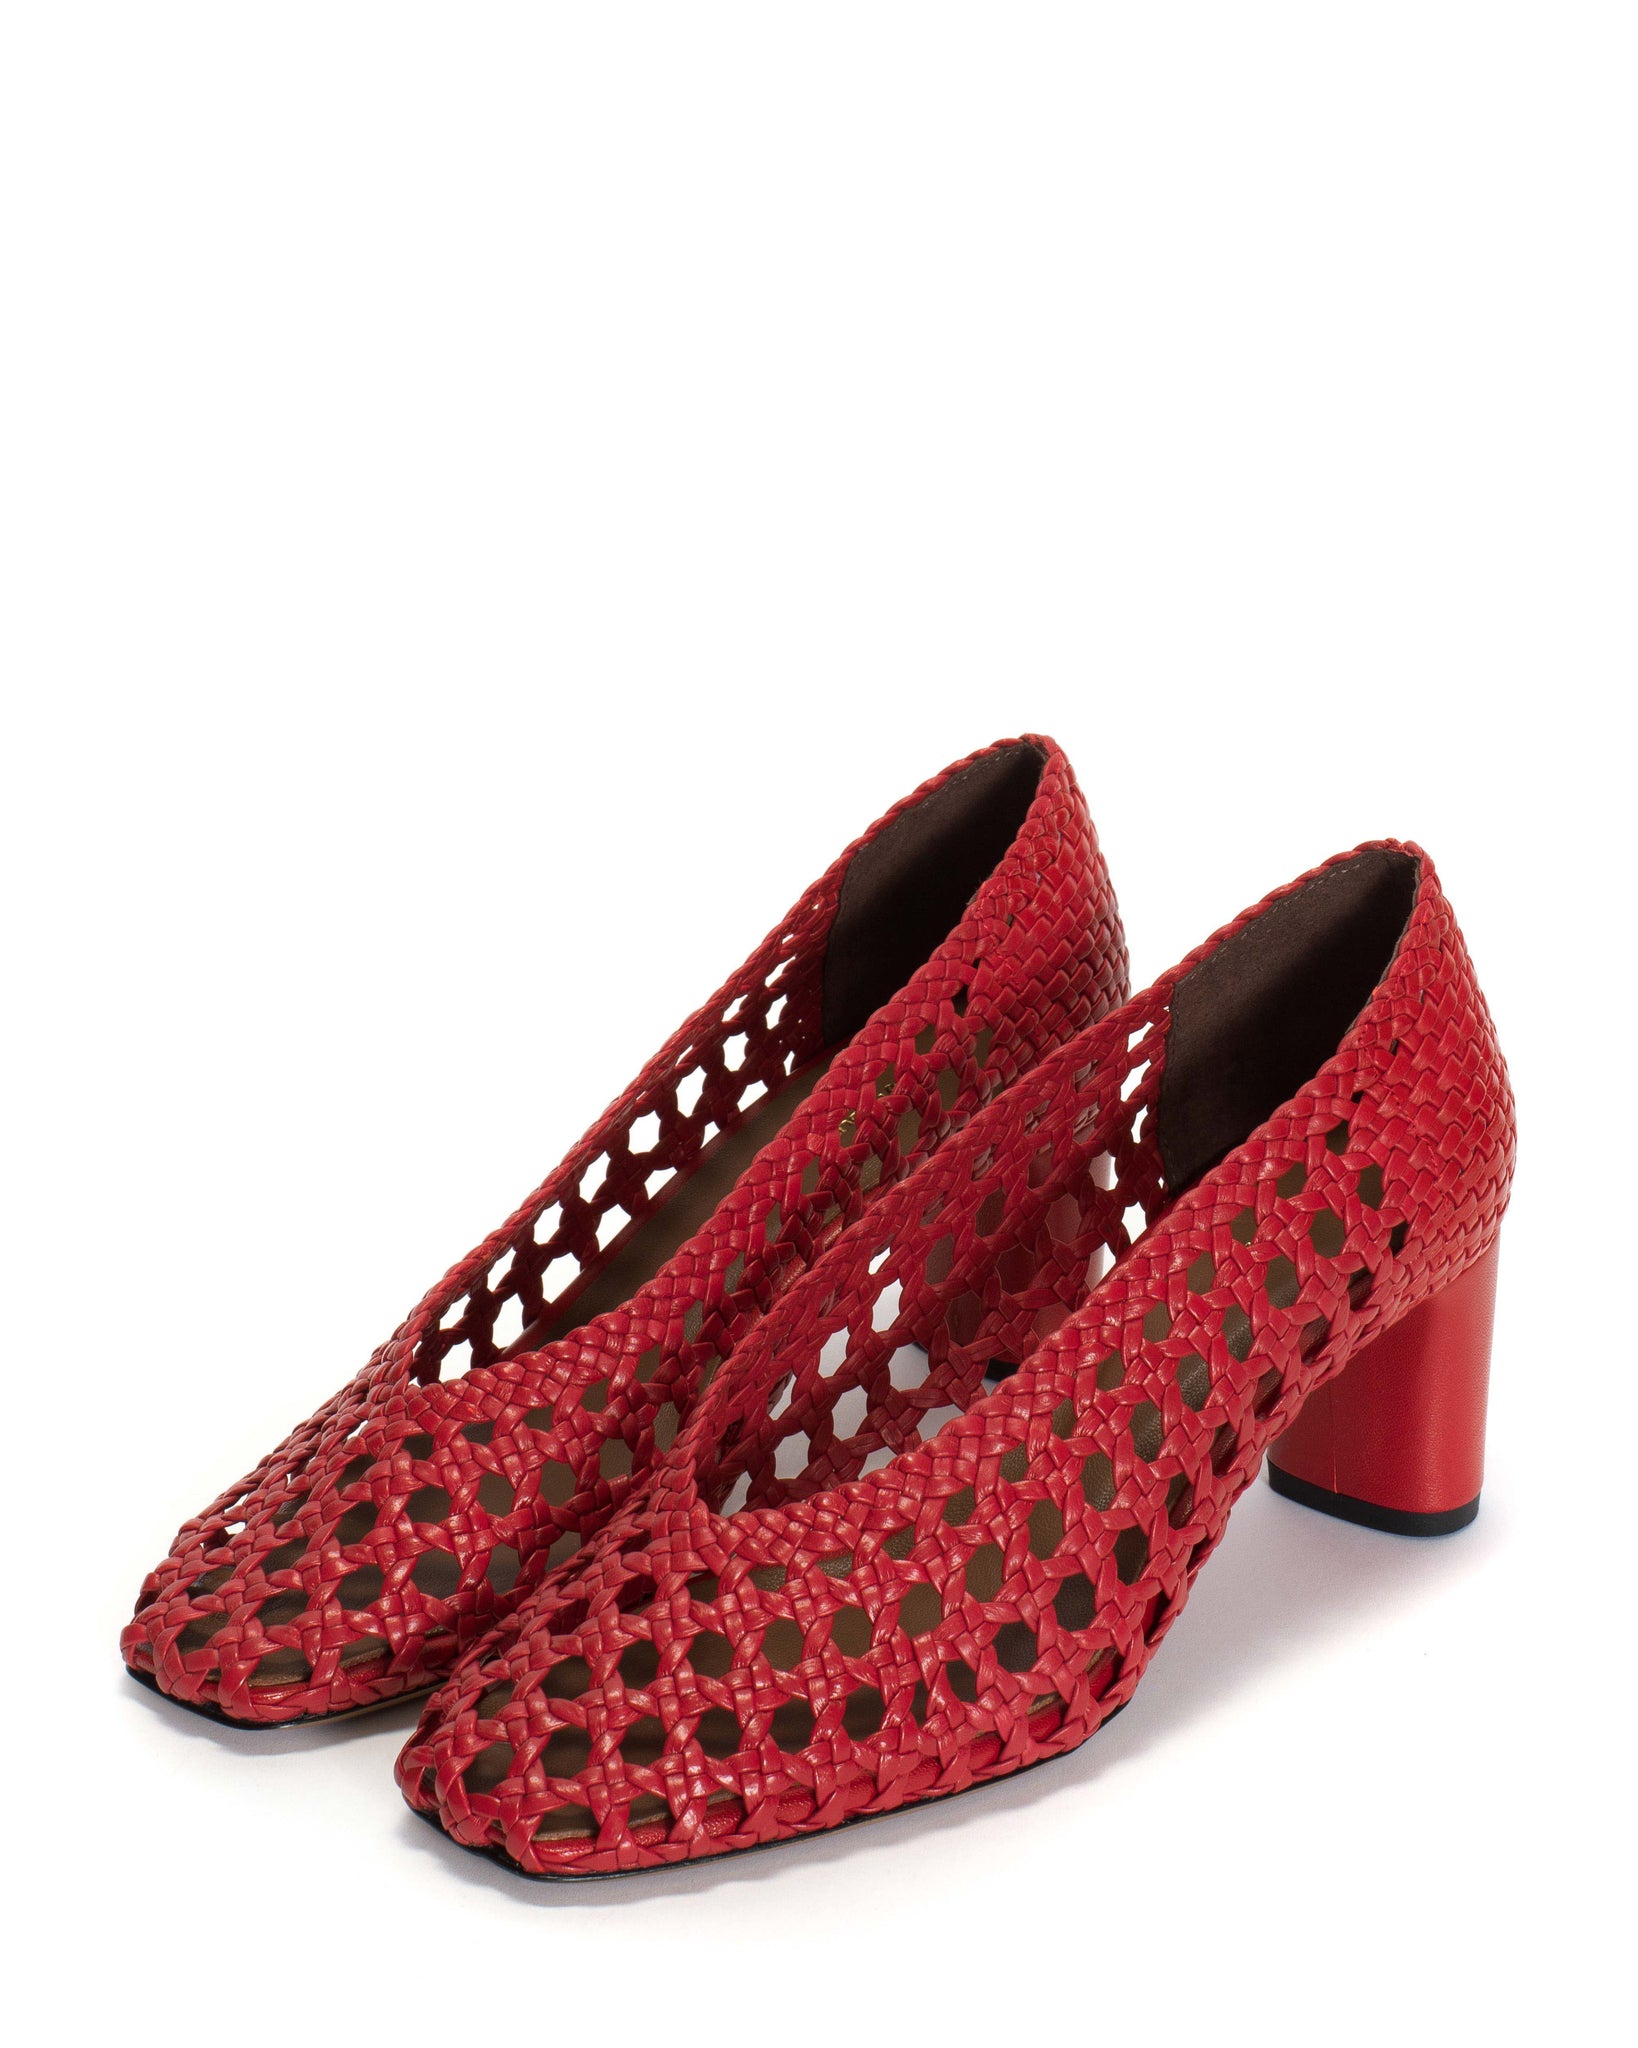 Sessi 60 Hand-braided leather Ruby red